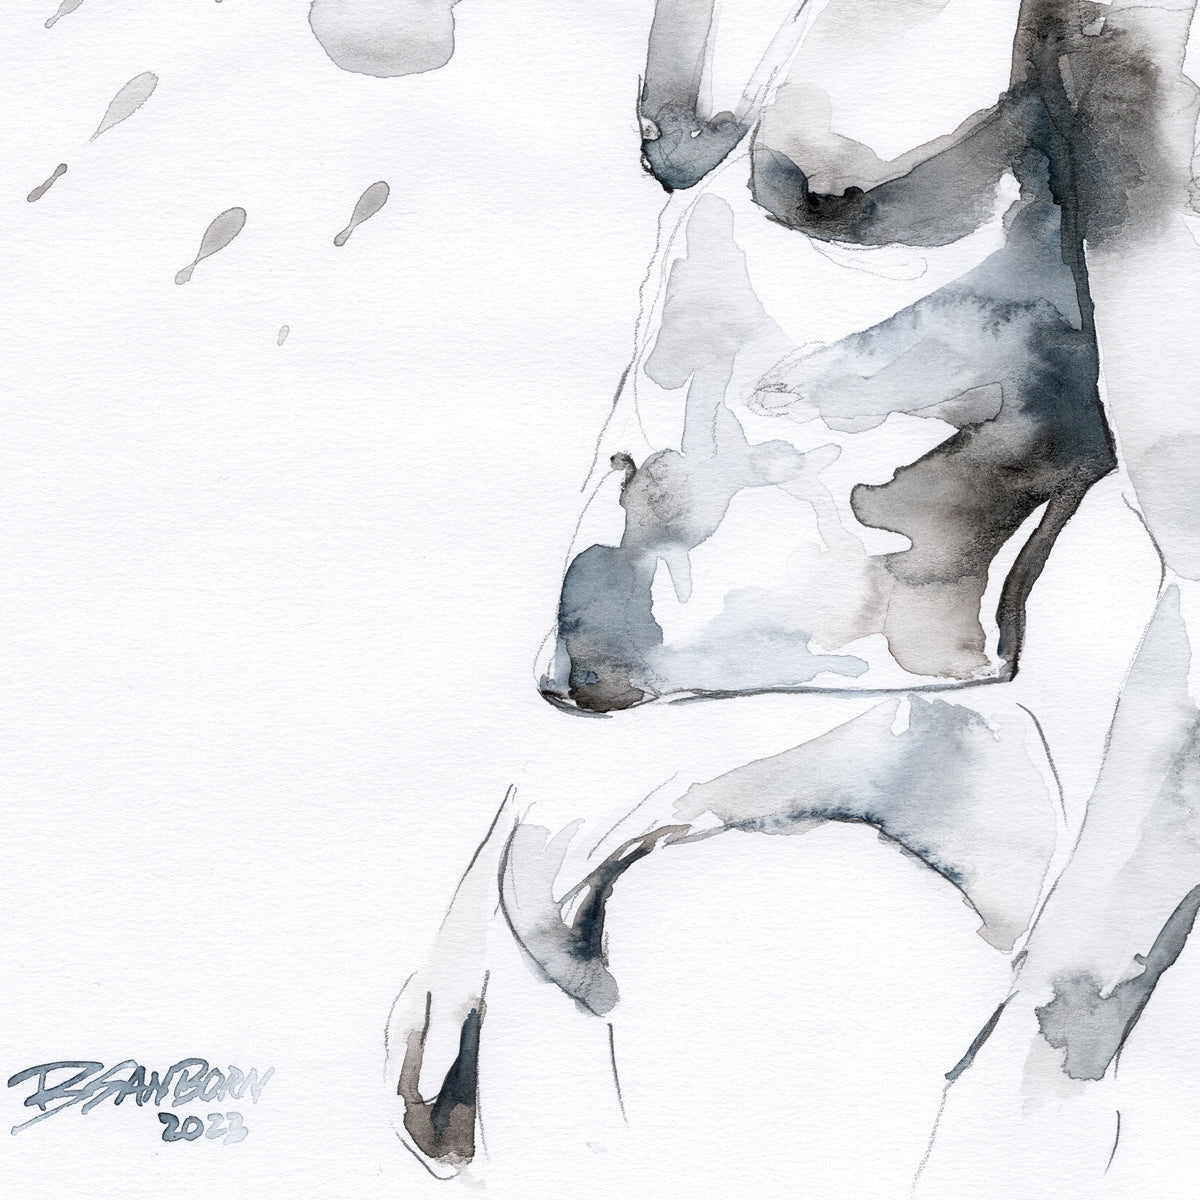 Male Profile with Defined Jawline and Muscular Arm - 9x12" Original Watercolor Painting